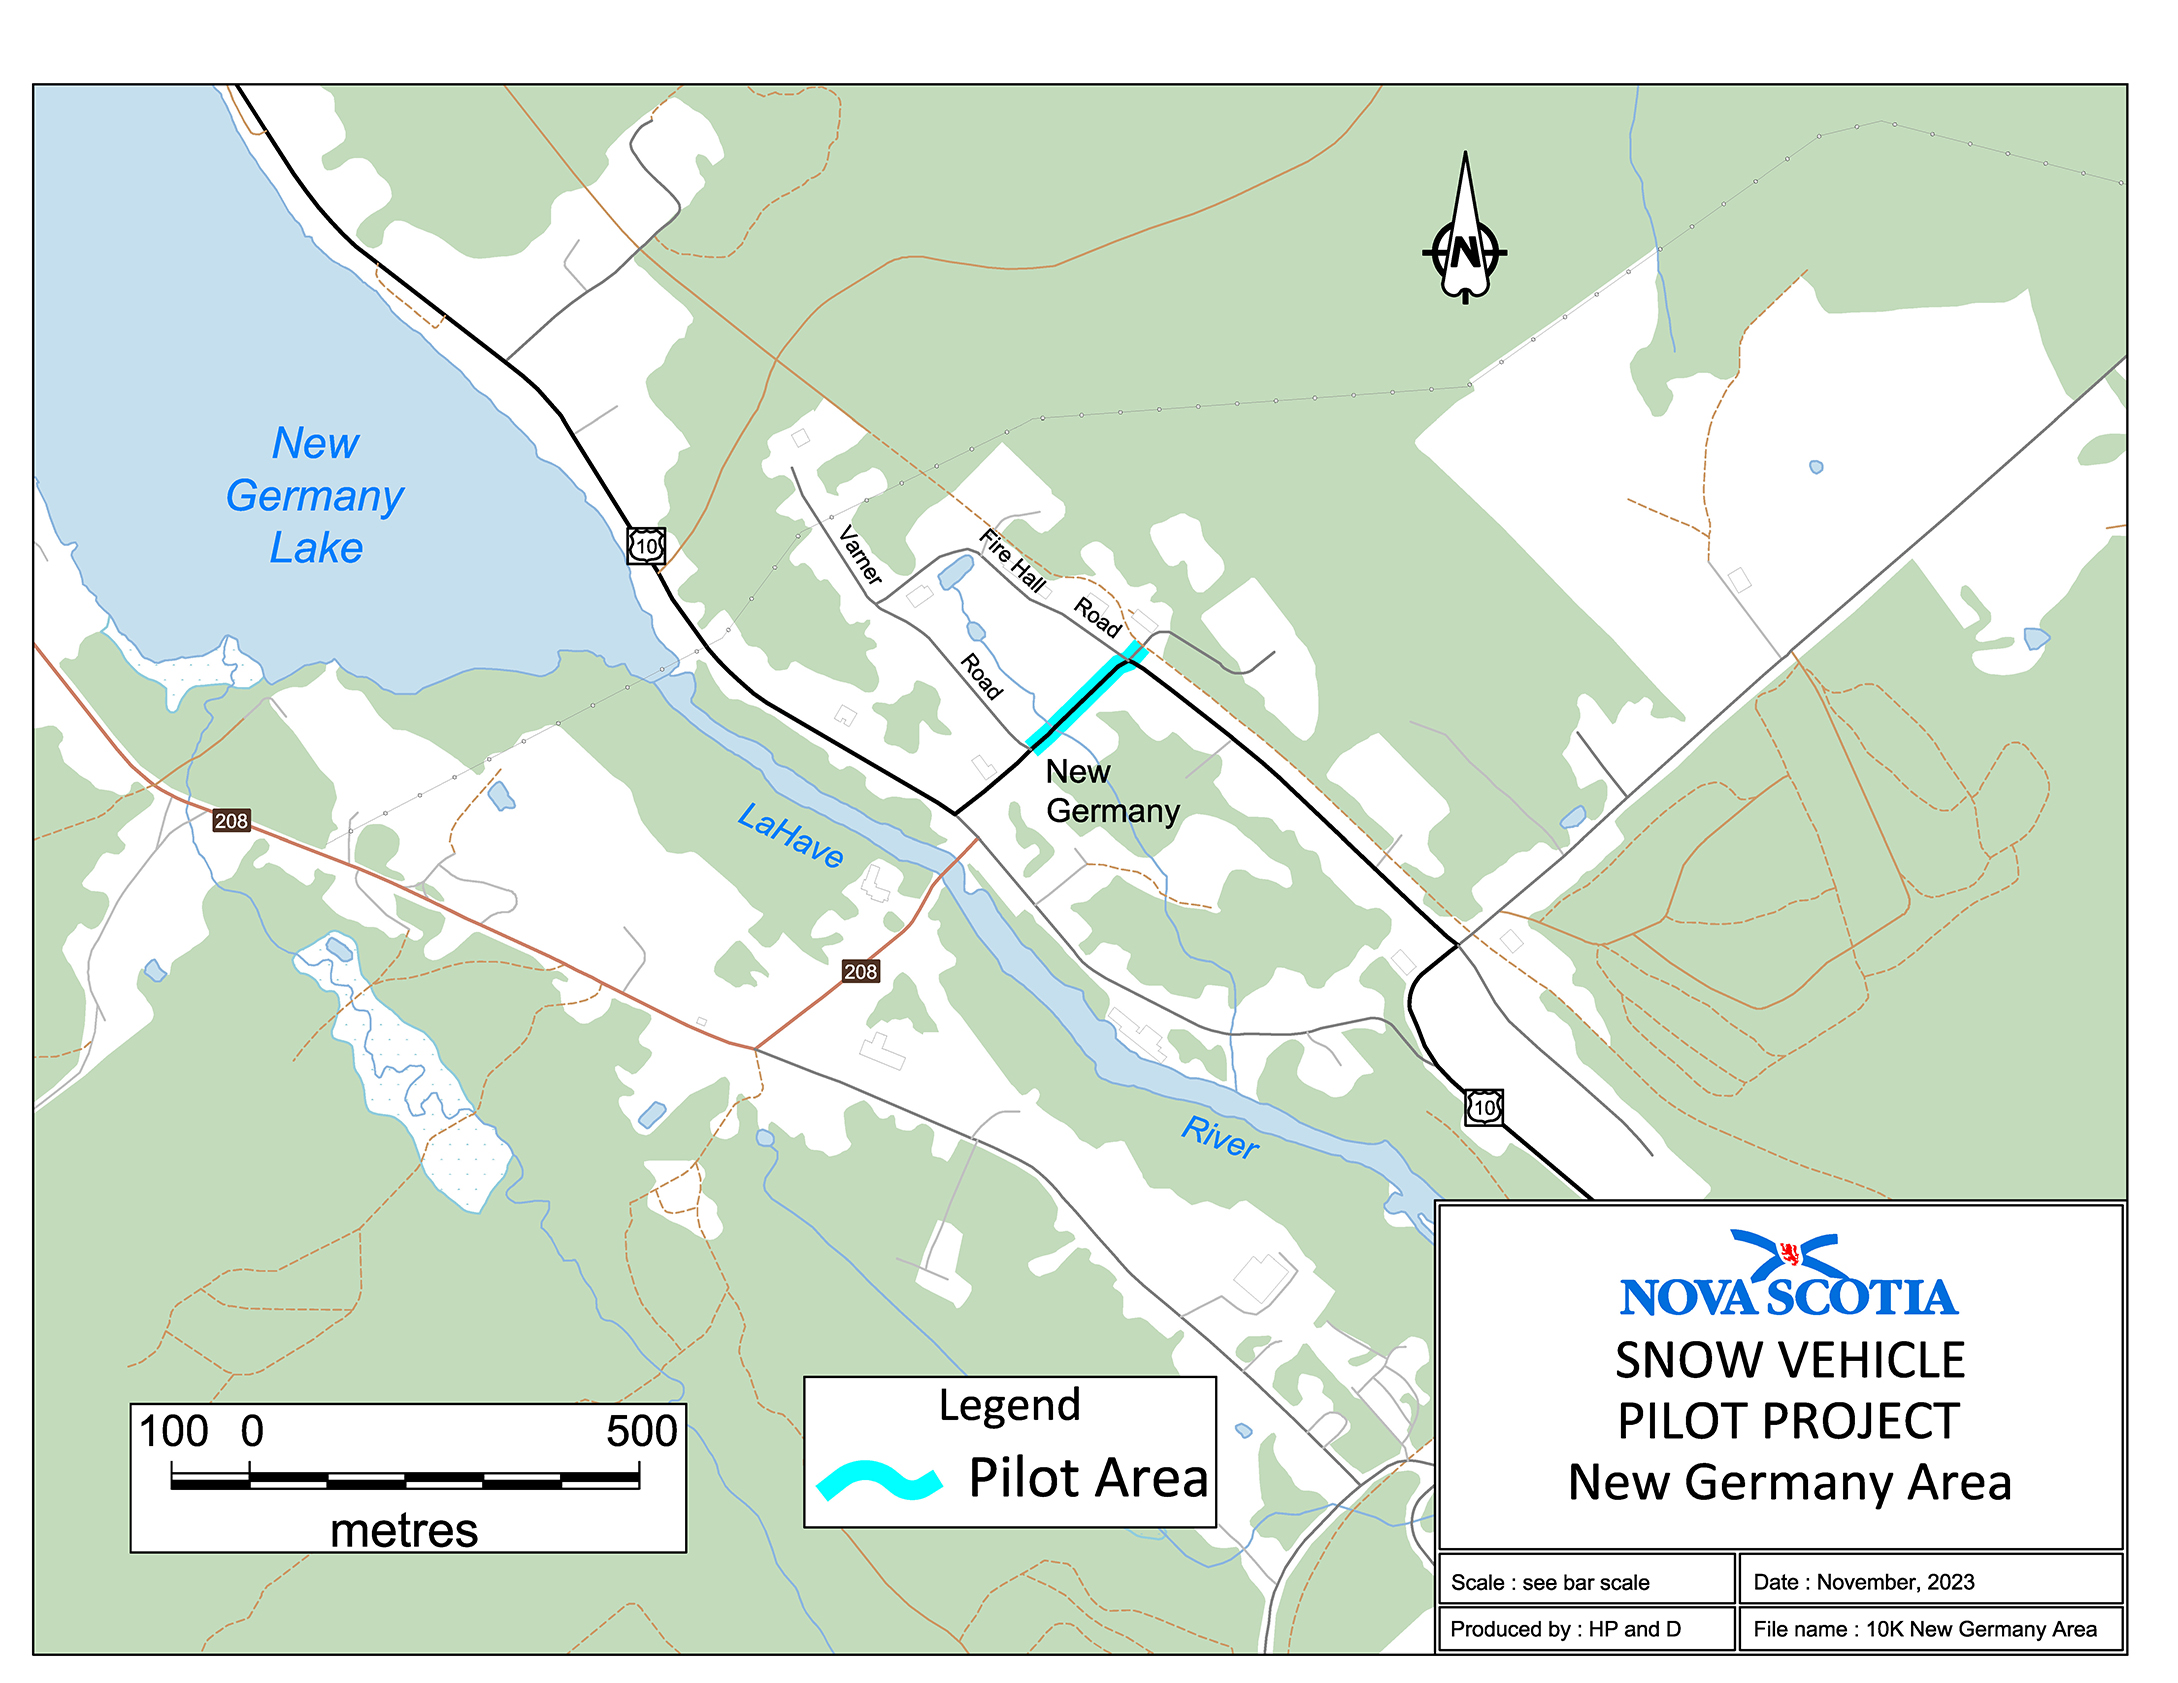 Graphic showing map of the Snow Vehicle Pilot Project New Germany Area